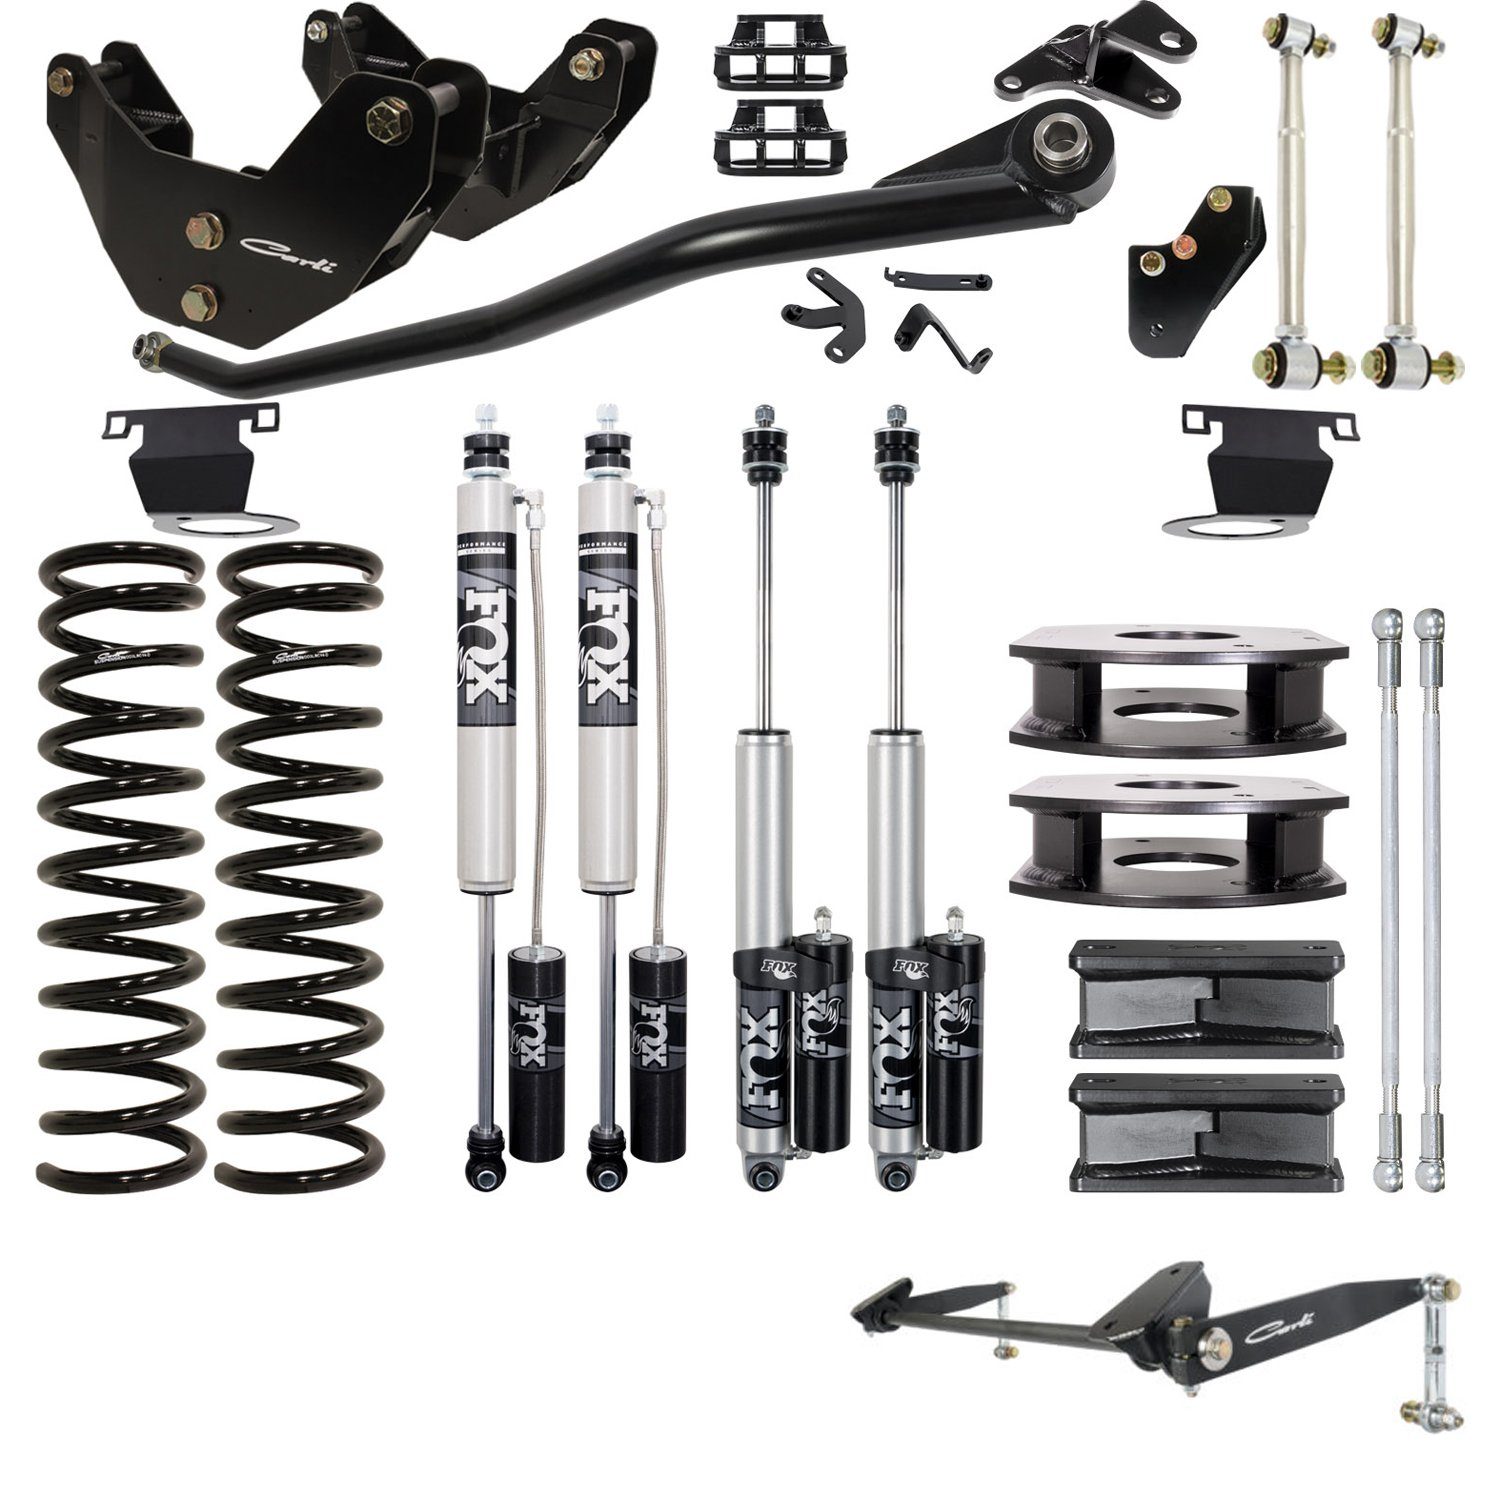 '19-23 Ram 2500 Air Ride Backcountry Suspension System-3.25" Lift Carli Suspension parts